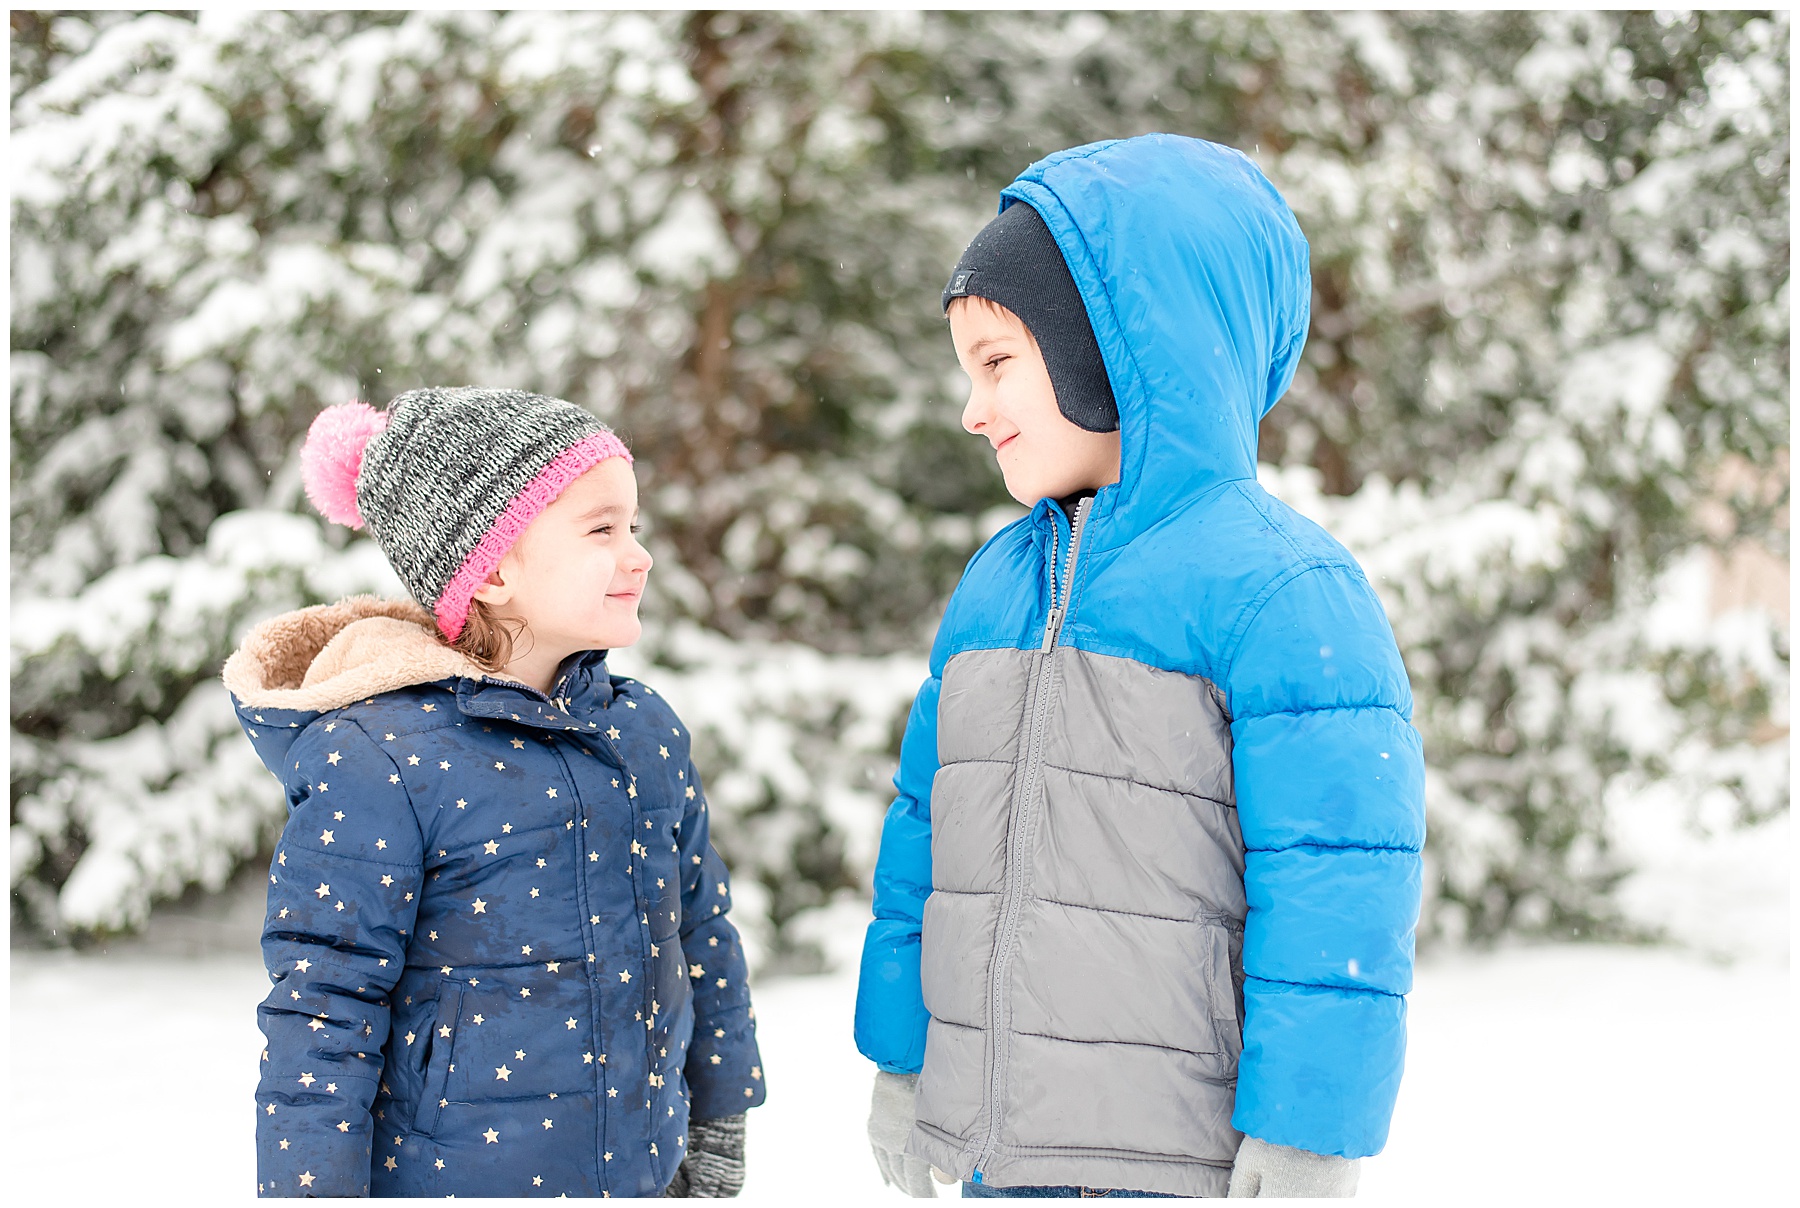 Boy in blue coat and girl in navy coat smiling at each other out in the snow